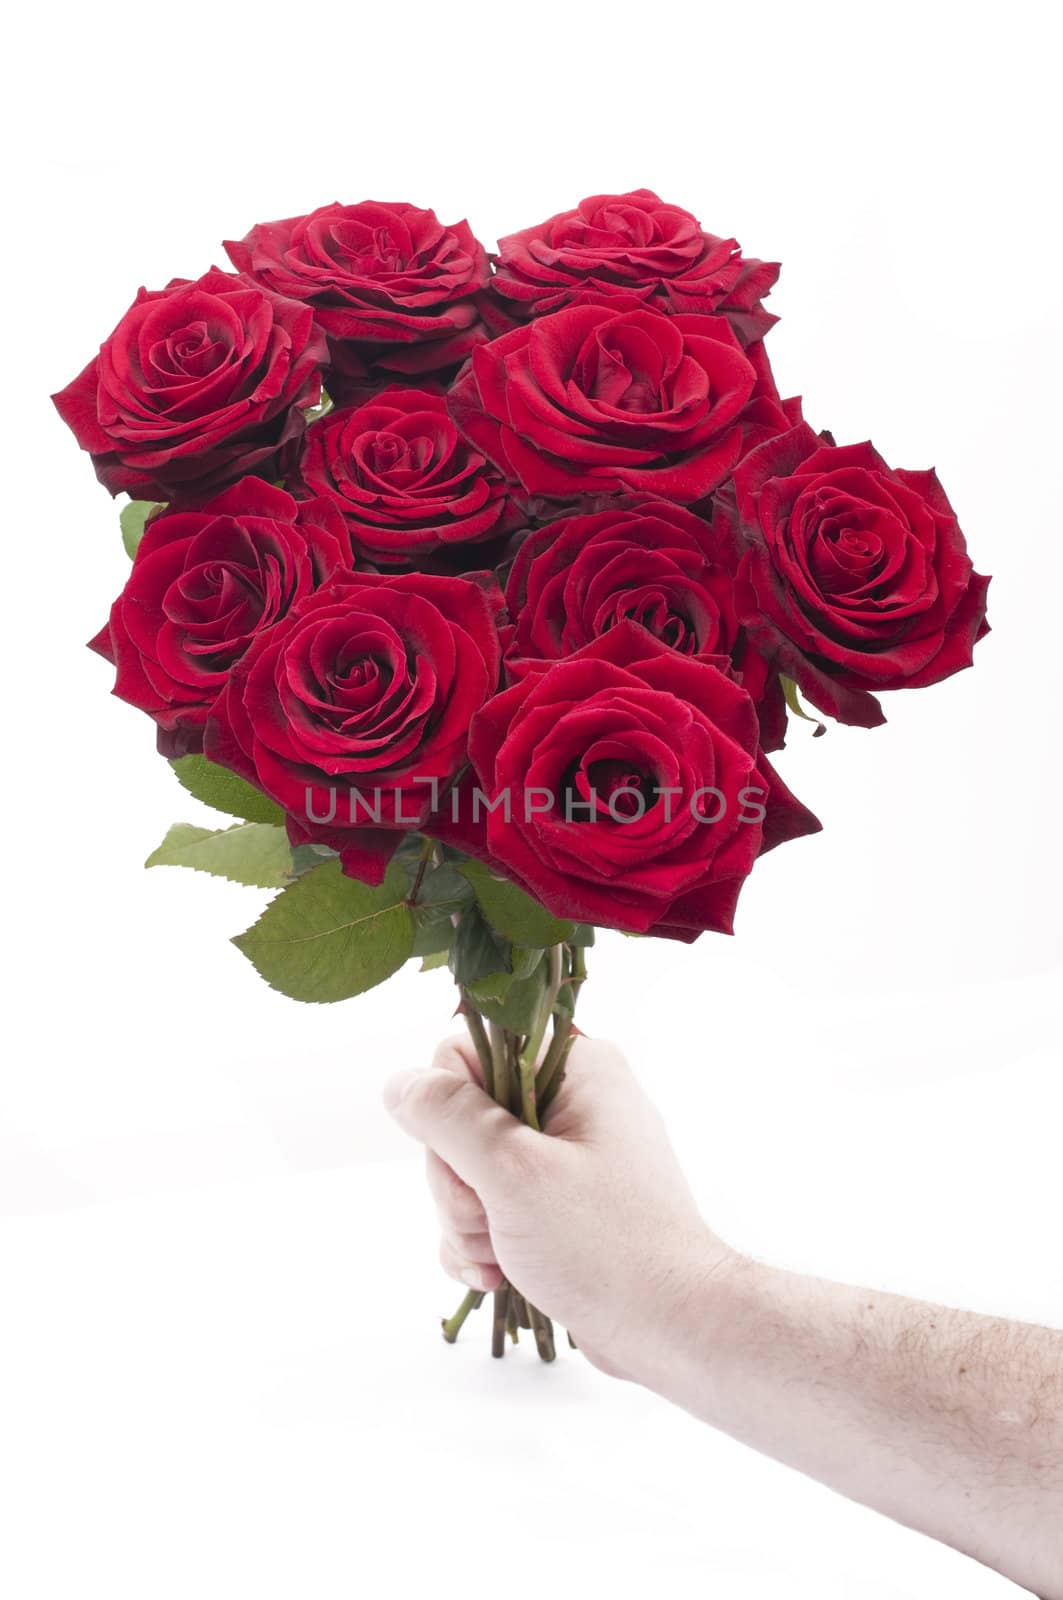 Red roses for you